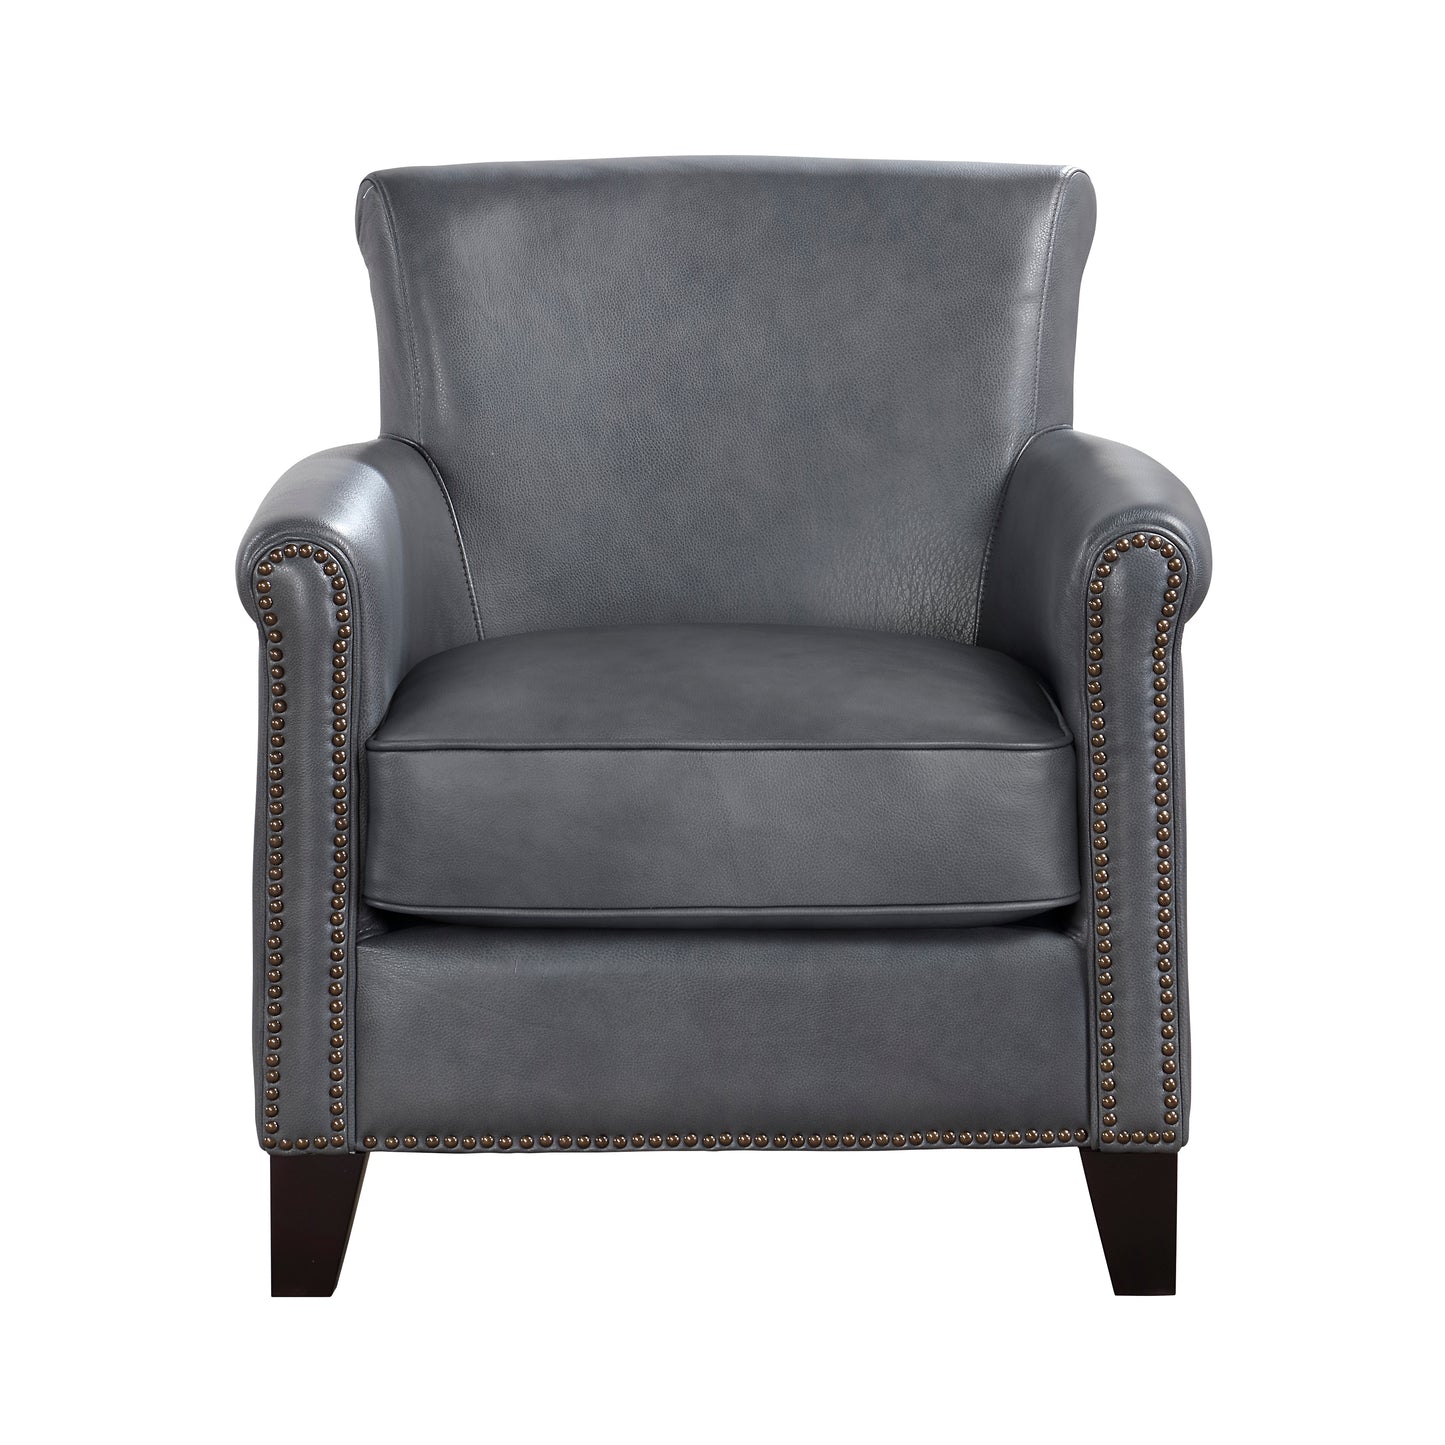 Braintree Top Grain Leather Accent Chair BLUE-GREY %100 LEATHER